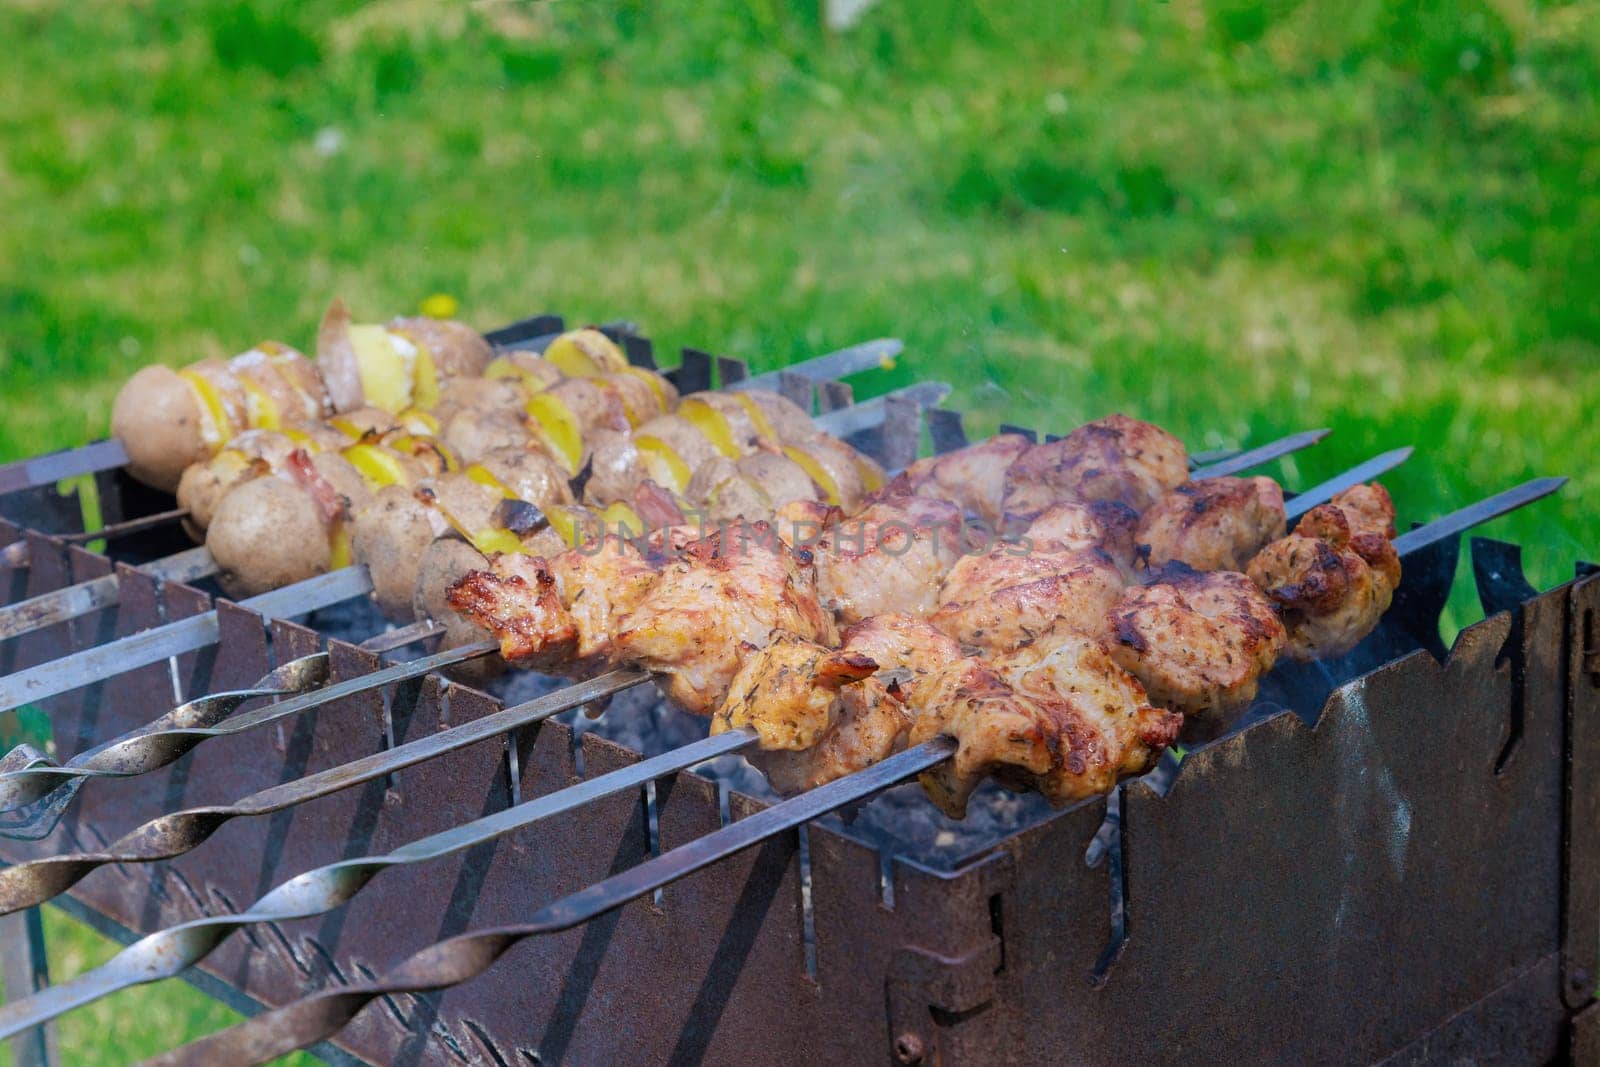 The kebab skewers and the potatoes with bacon are grilled on a portable metal brazier by ungvar